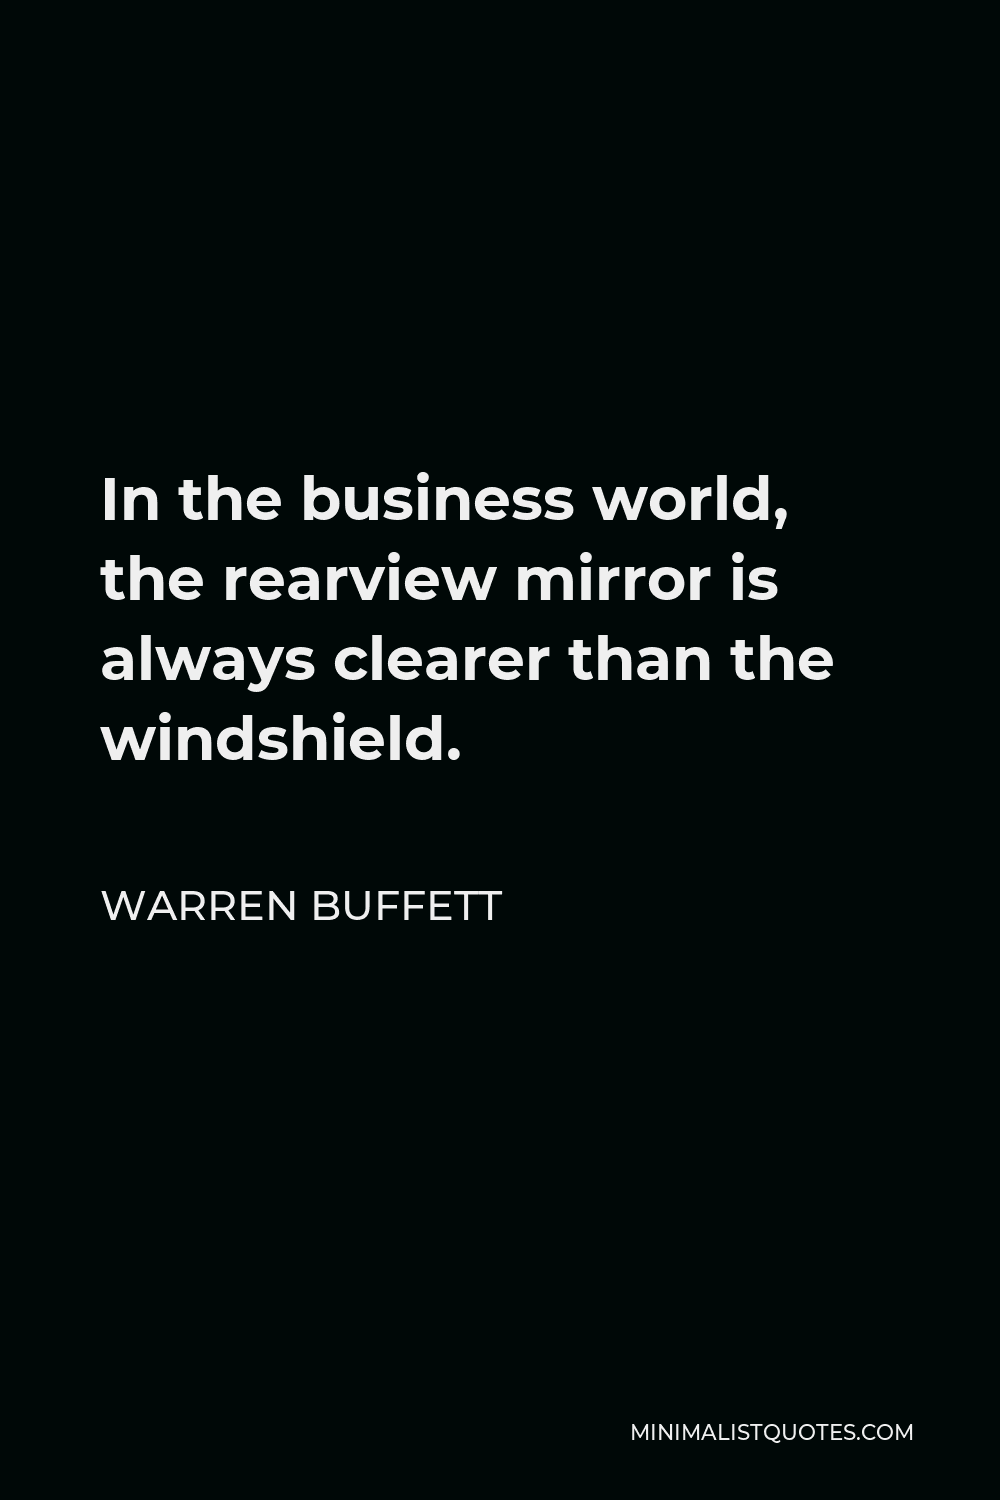 Warren Buffett Quote - In the business world, the rearview mirror is always clearer than the windshield.